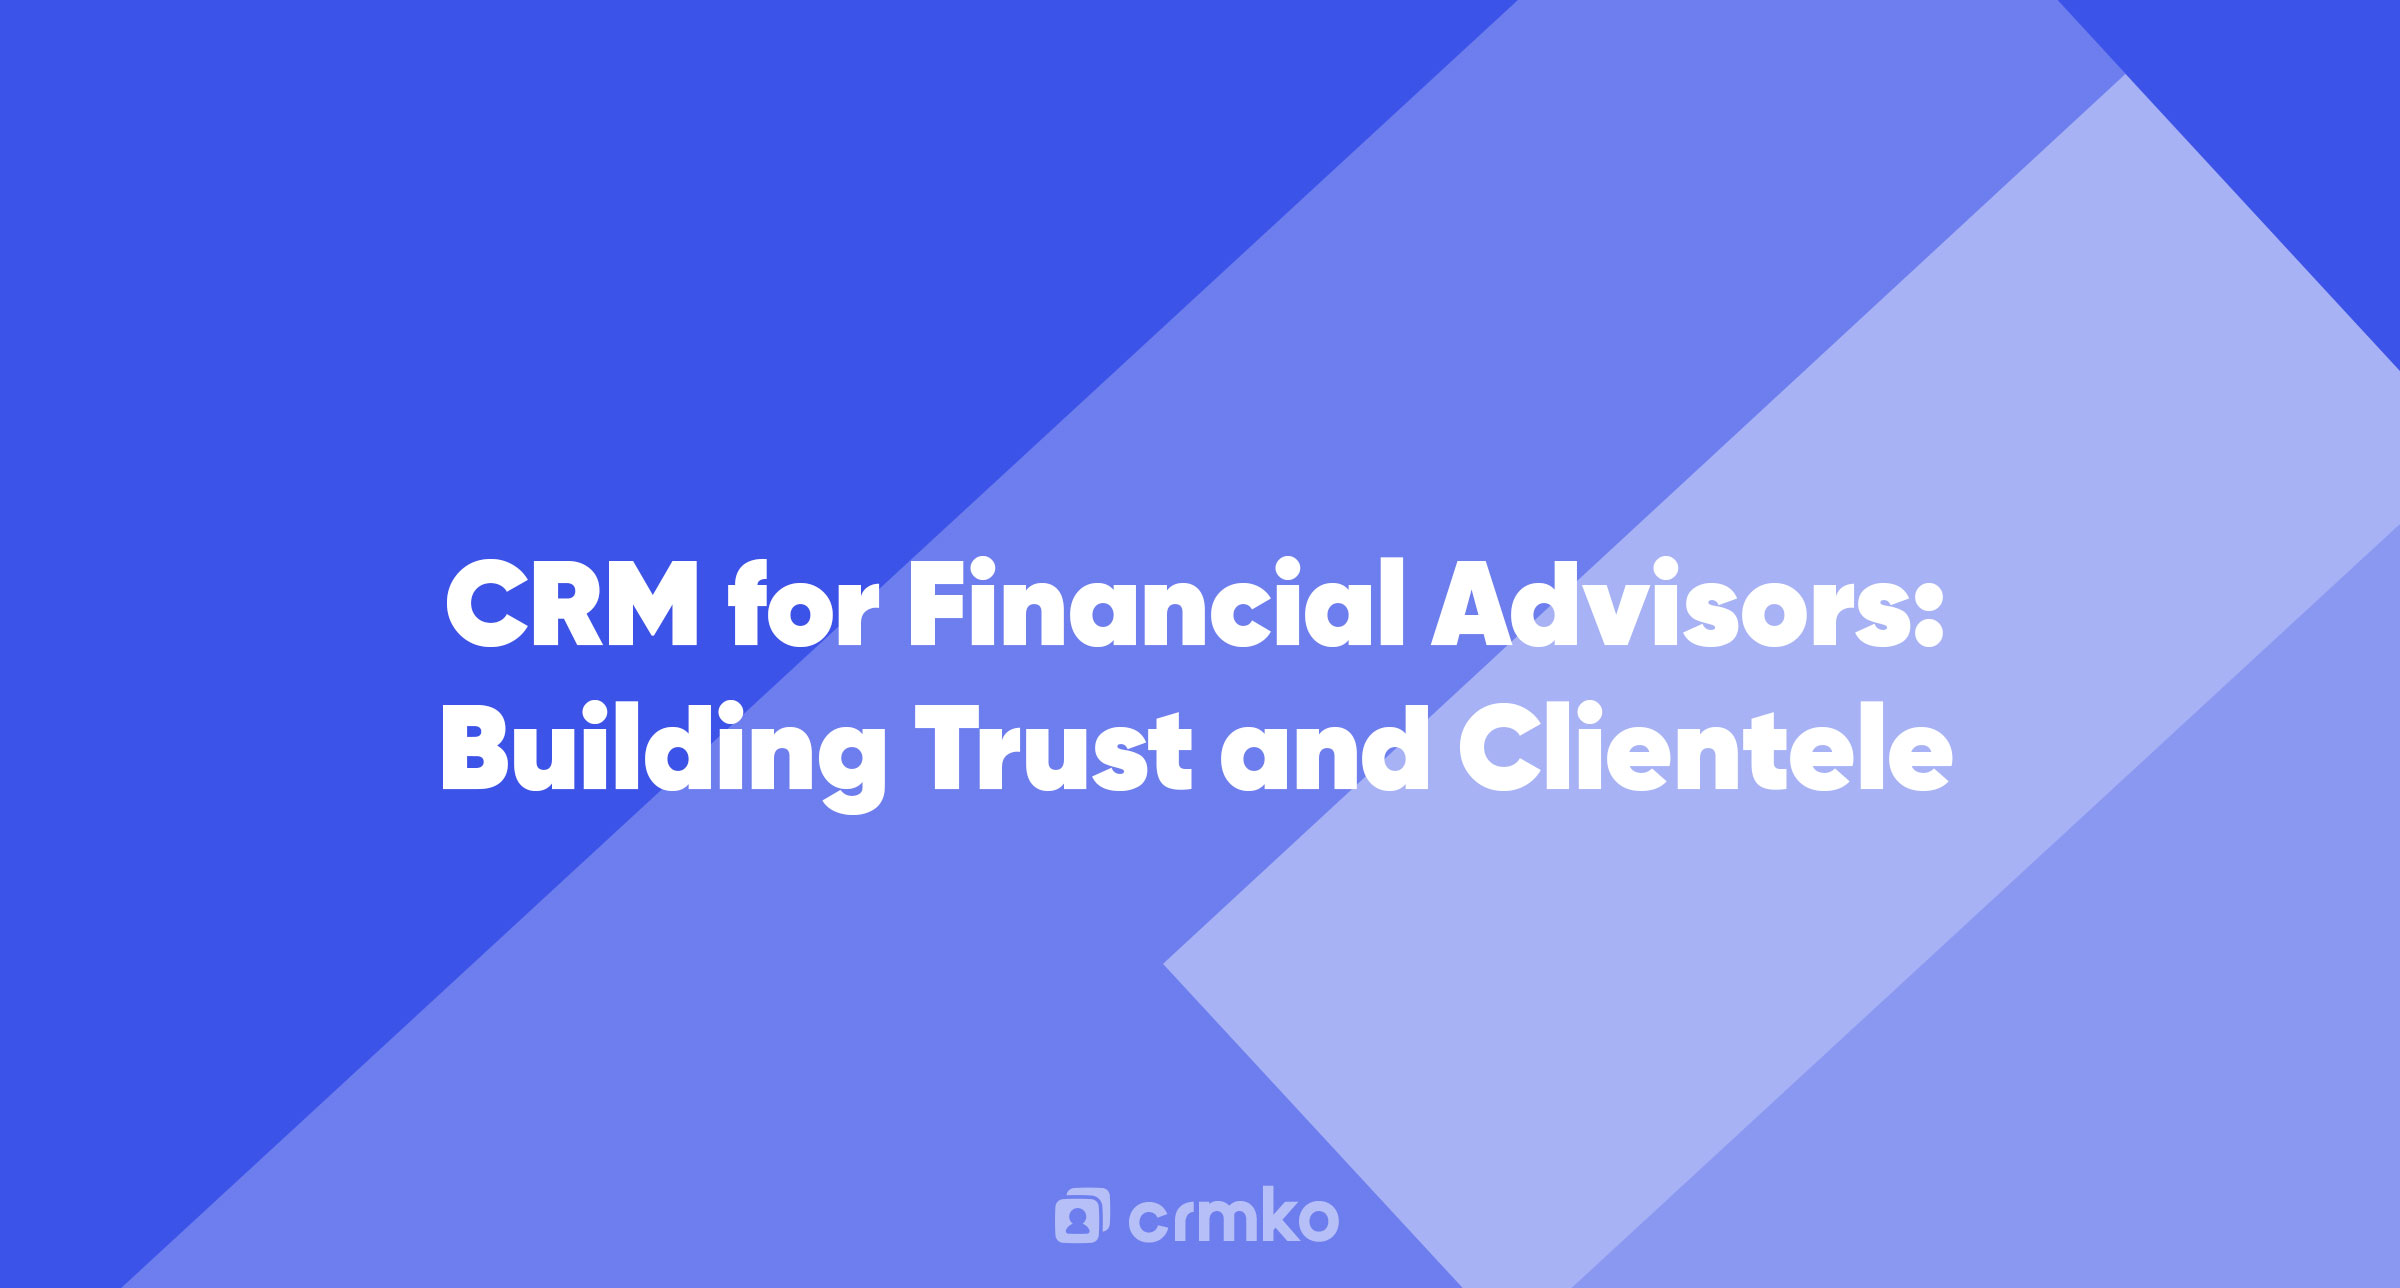 Article | CRM for Financial Advisors: Building Trust and Clientele